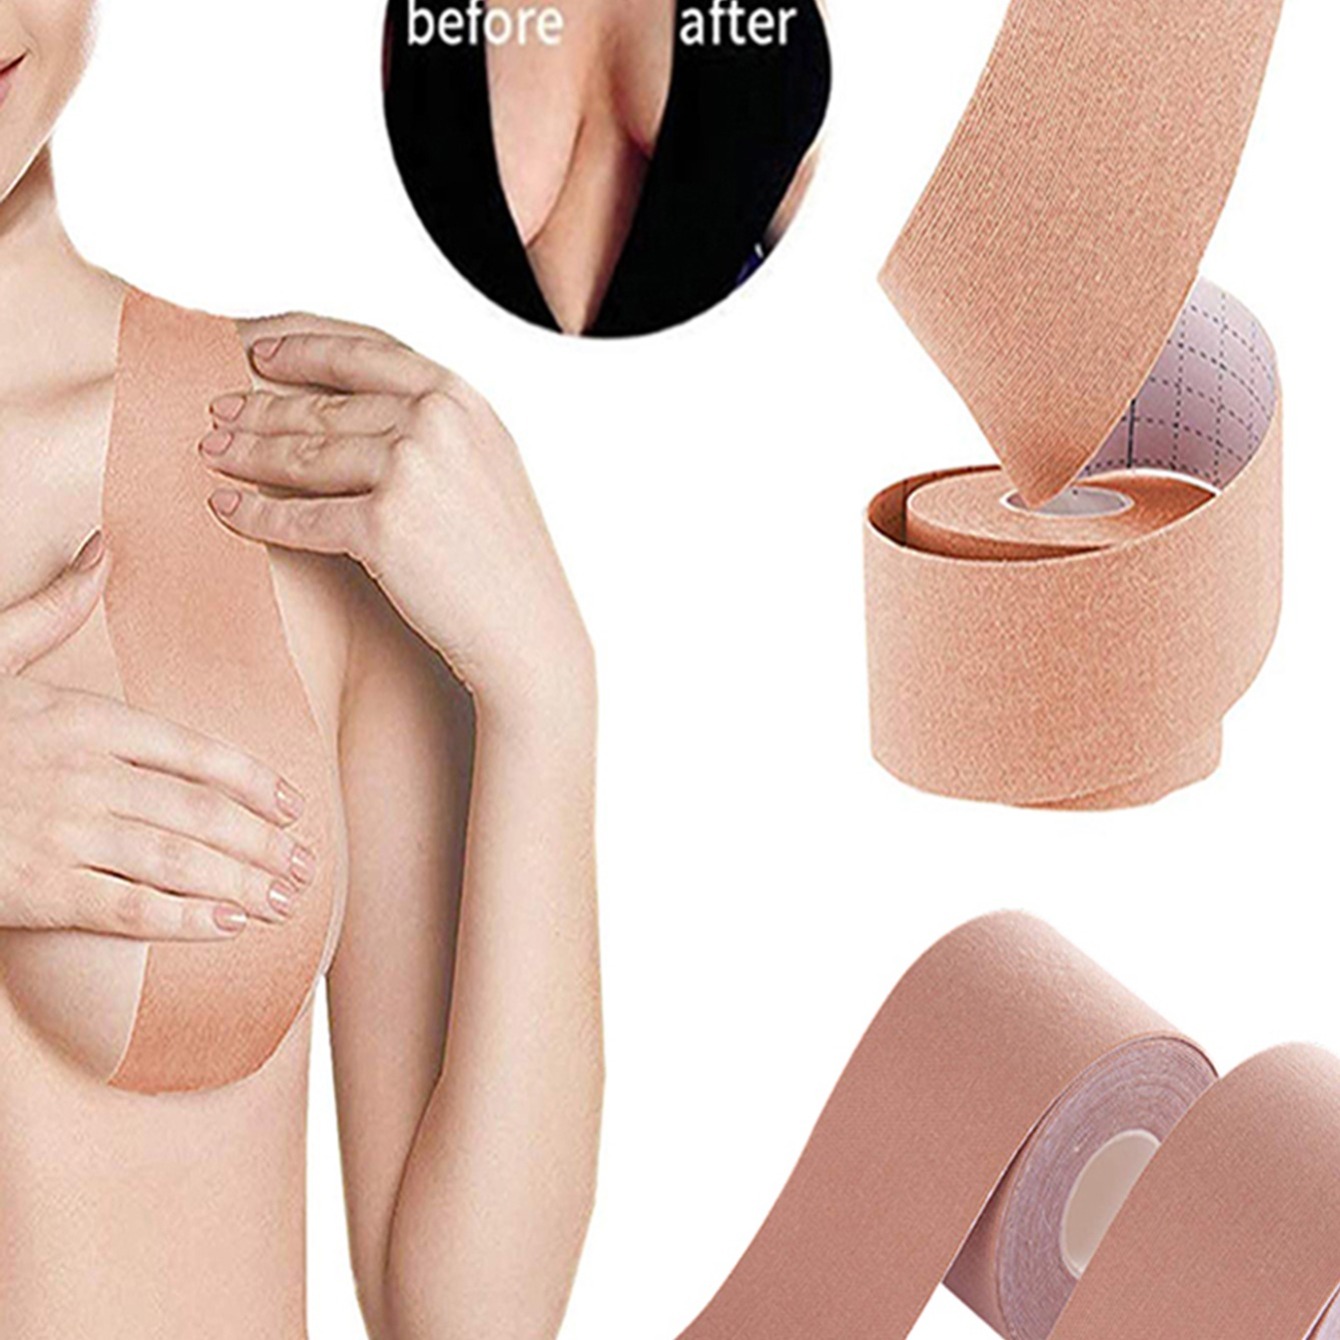 1roll 5cm*5m Flesh-Colored Bra Strap Tape For Women's Breast Lifting And  Nipple Covers, 3 Colors, Back Adhesive, Invisible Bra Straps